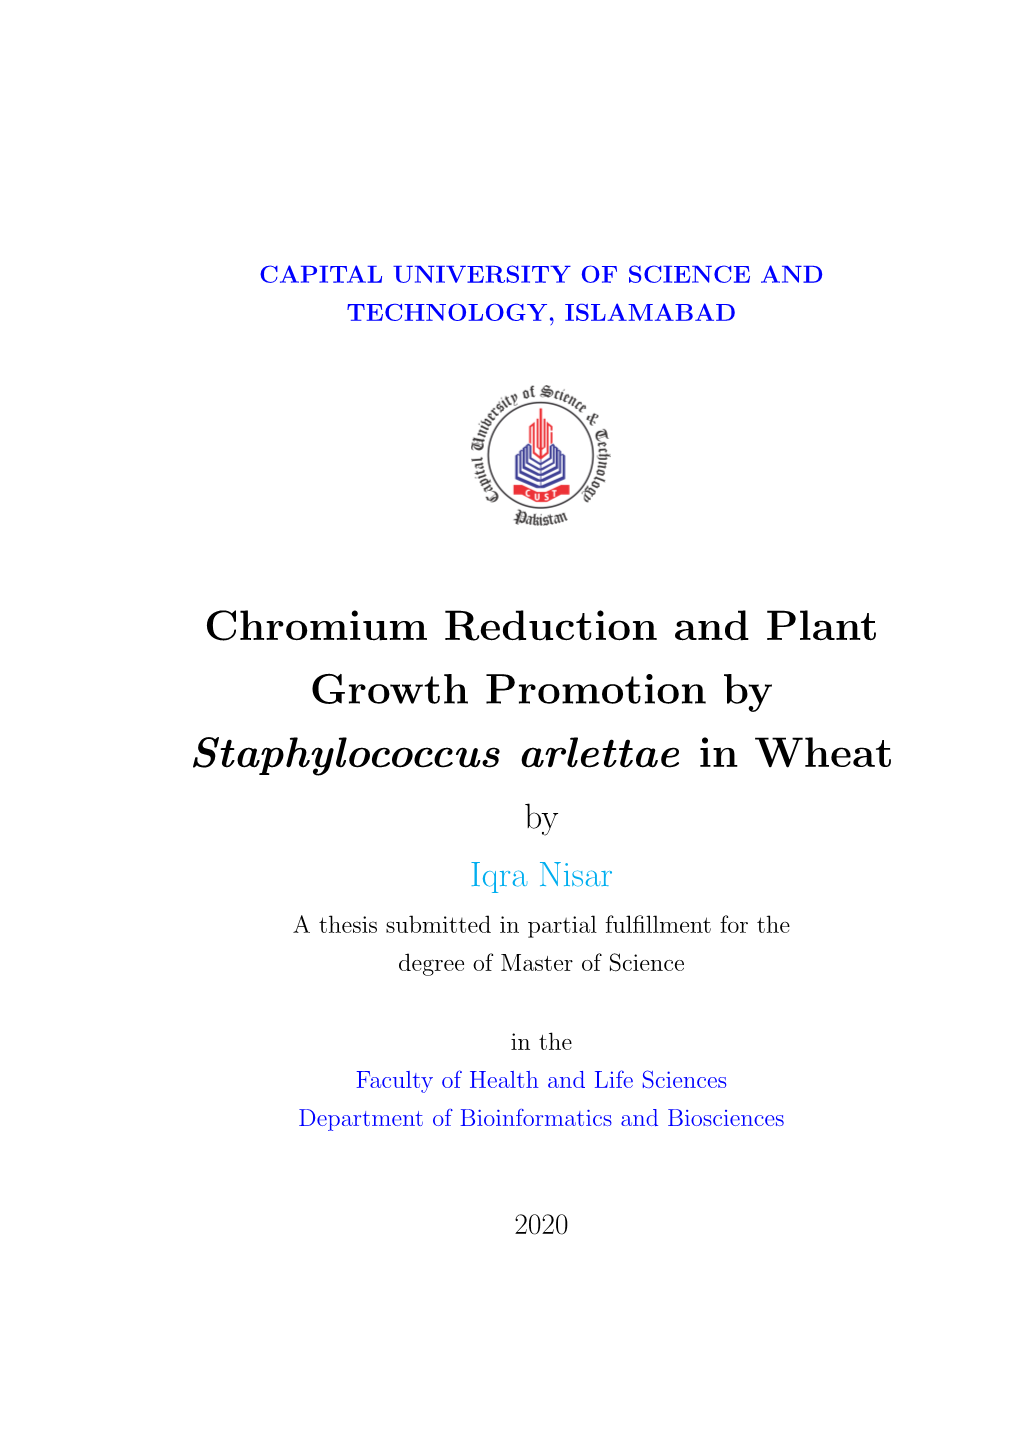 Chromium Reduction and Plant Growth Promotion By